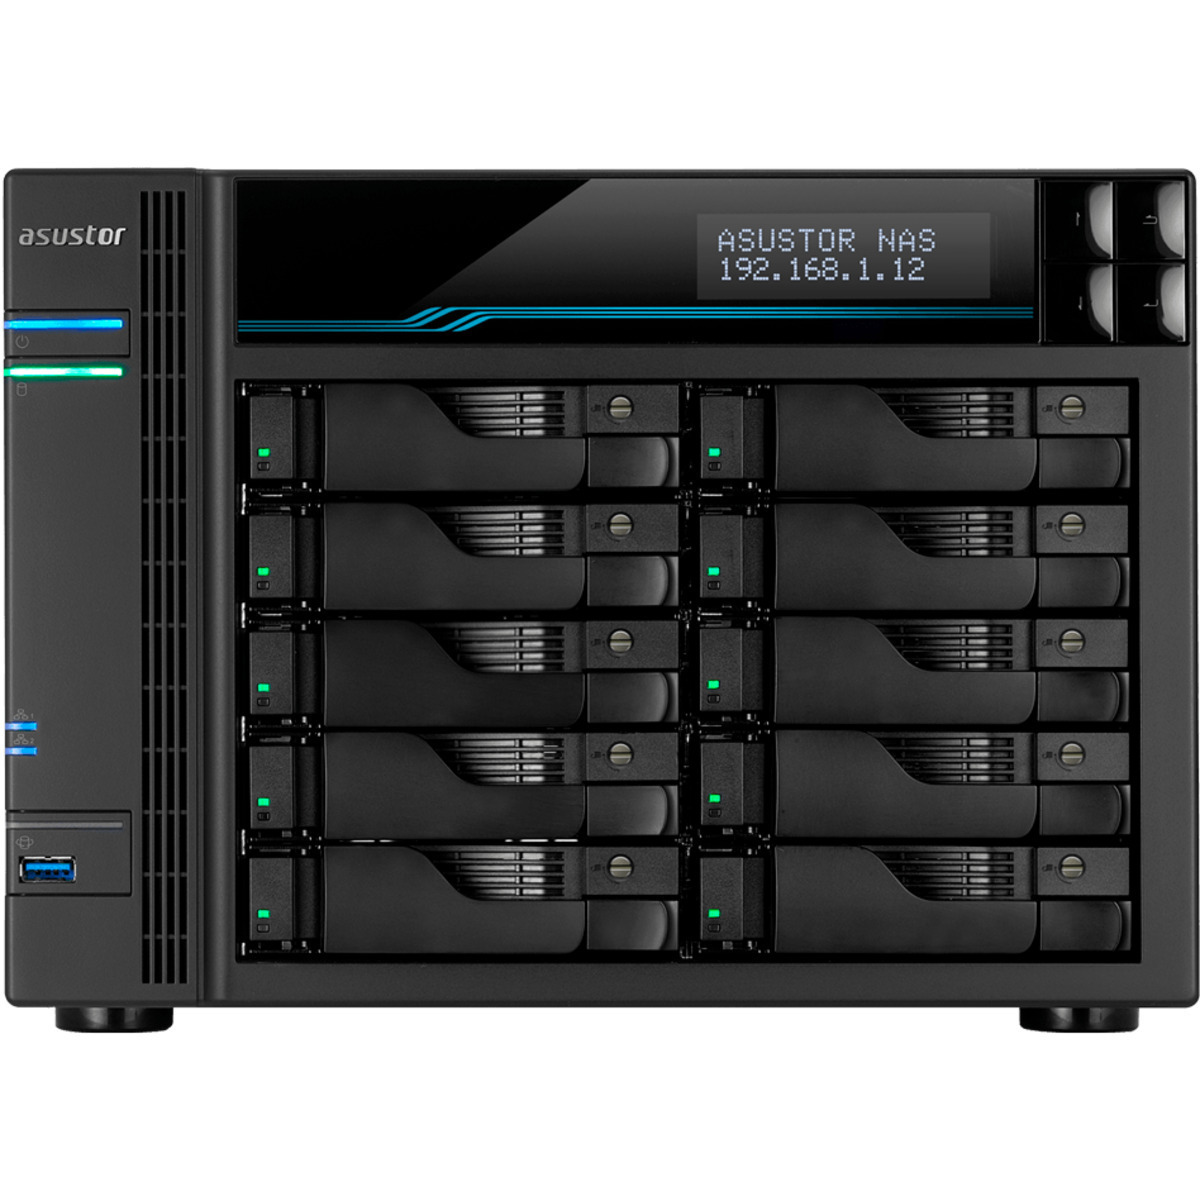 buy $5565 ASUSTOR AS7110T Lockerstor 10 Pro 80tb Desktop NAS - Network Attached Storage Device 10x8000gb Seagate EXOS ST8000NM000A 3.5 7200rpm SATA 6Gb/s HDD ENTERPRISE Class Drives Installed - Burn-In Tested - nas headquarters buy network attached storage server device das new raid-5 free shipping usa christmas new year holiday sale AS7110T Lockerstor 10 Pro